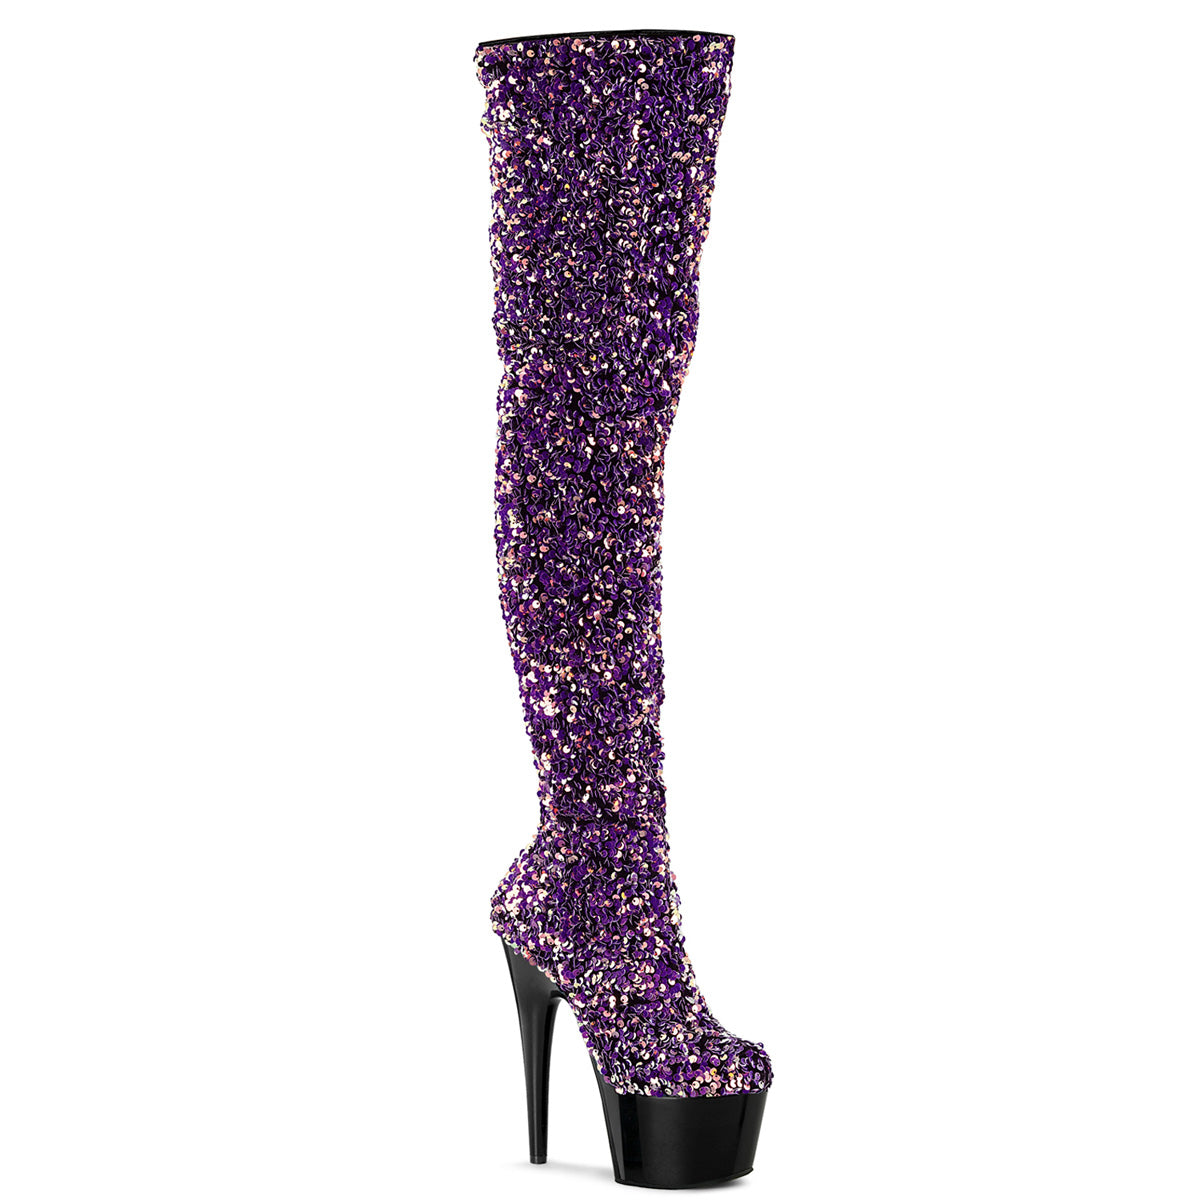 Pleaser ADORE-3020 Purple Multi Sequins 7 Inch (178mm) Heel, 2 3/4 Inch (70mm) Platform Stretch  Sequin Thigh High Boot Featuring Multi Sequined Body, Inside Zip Closure